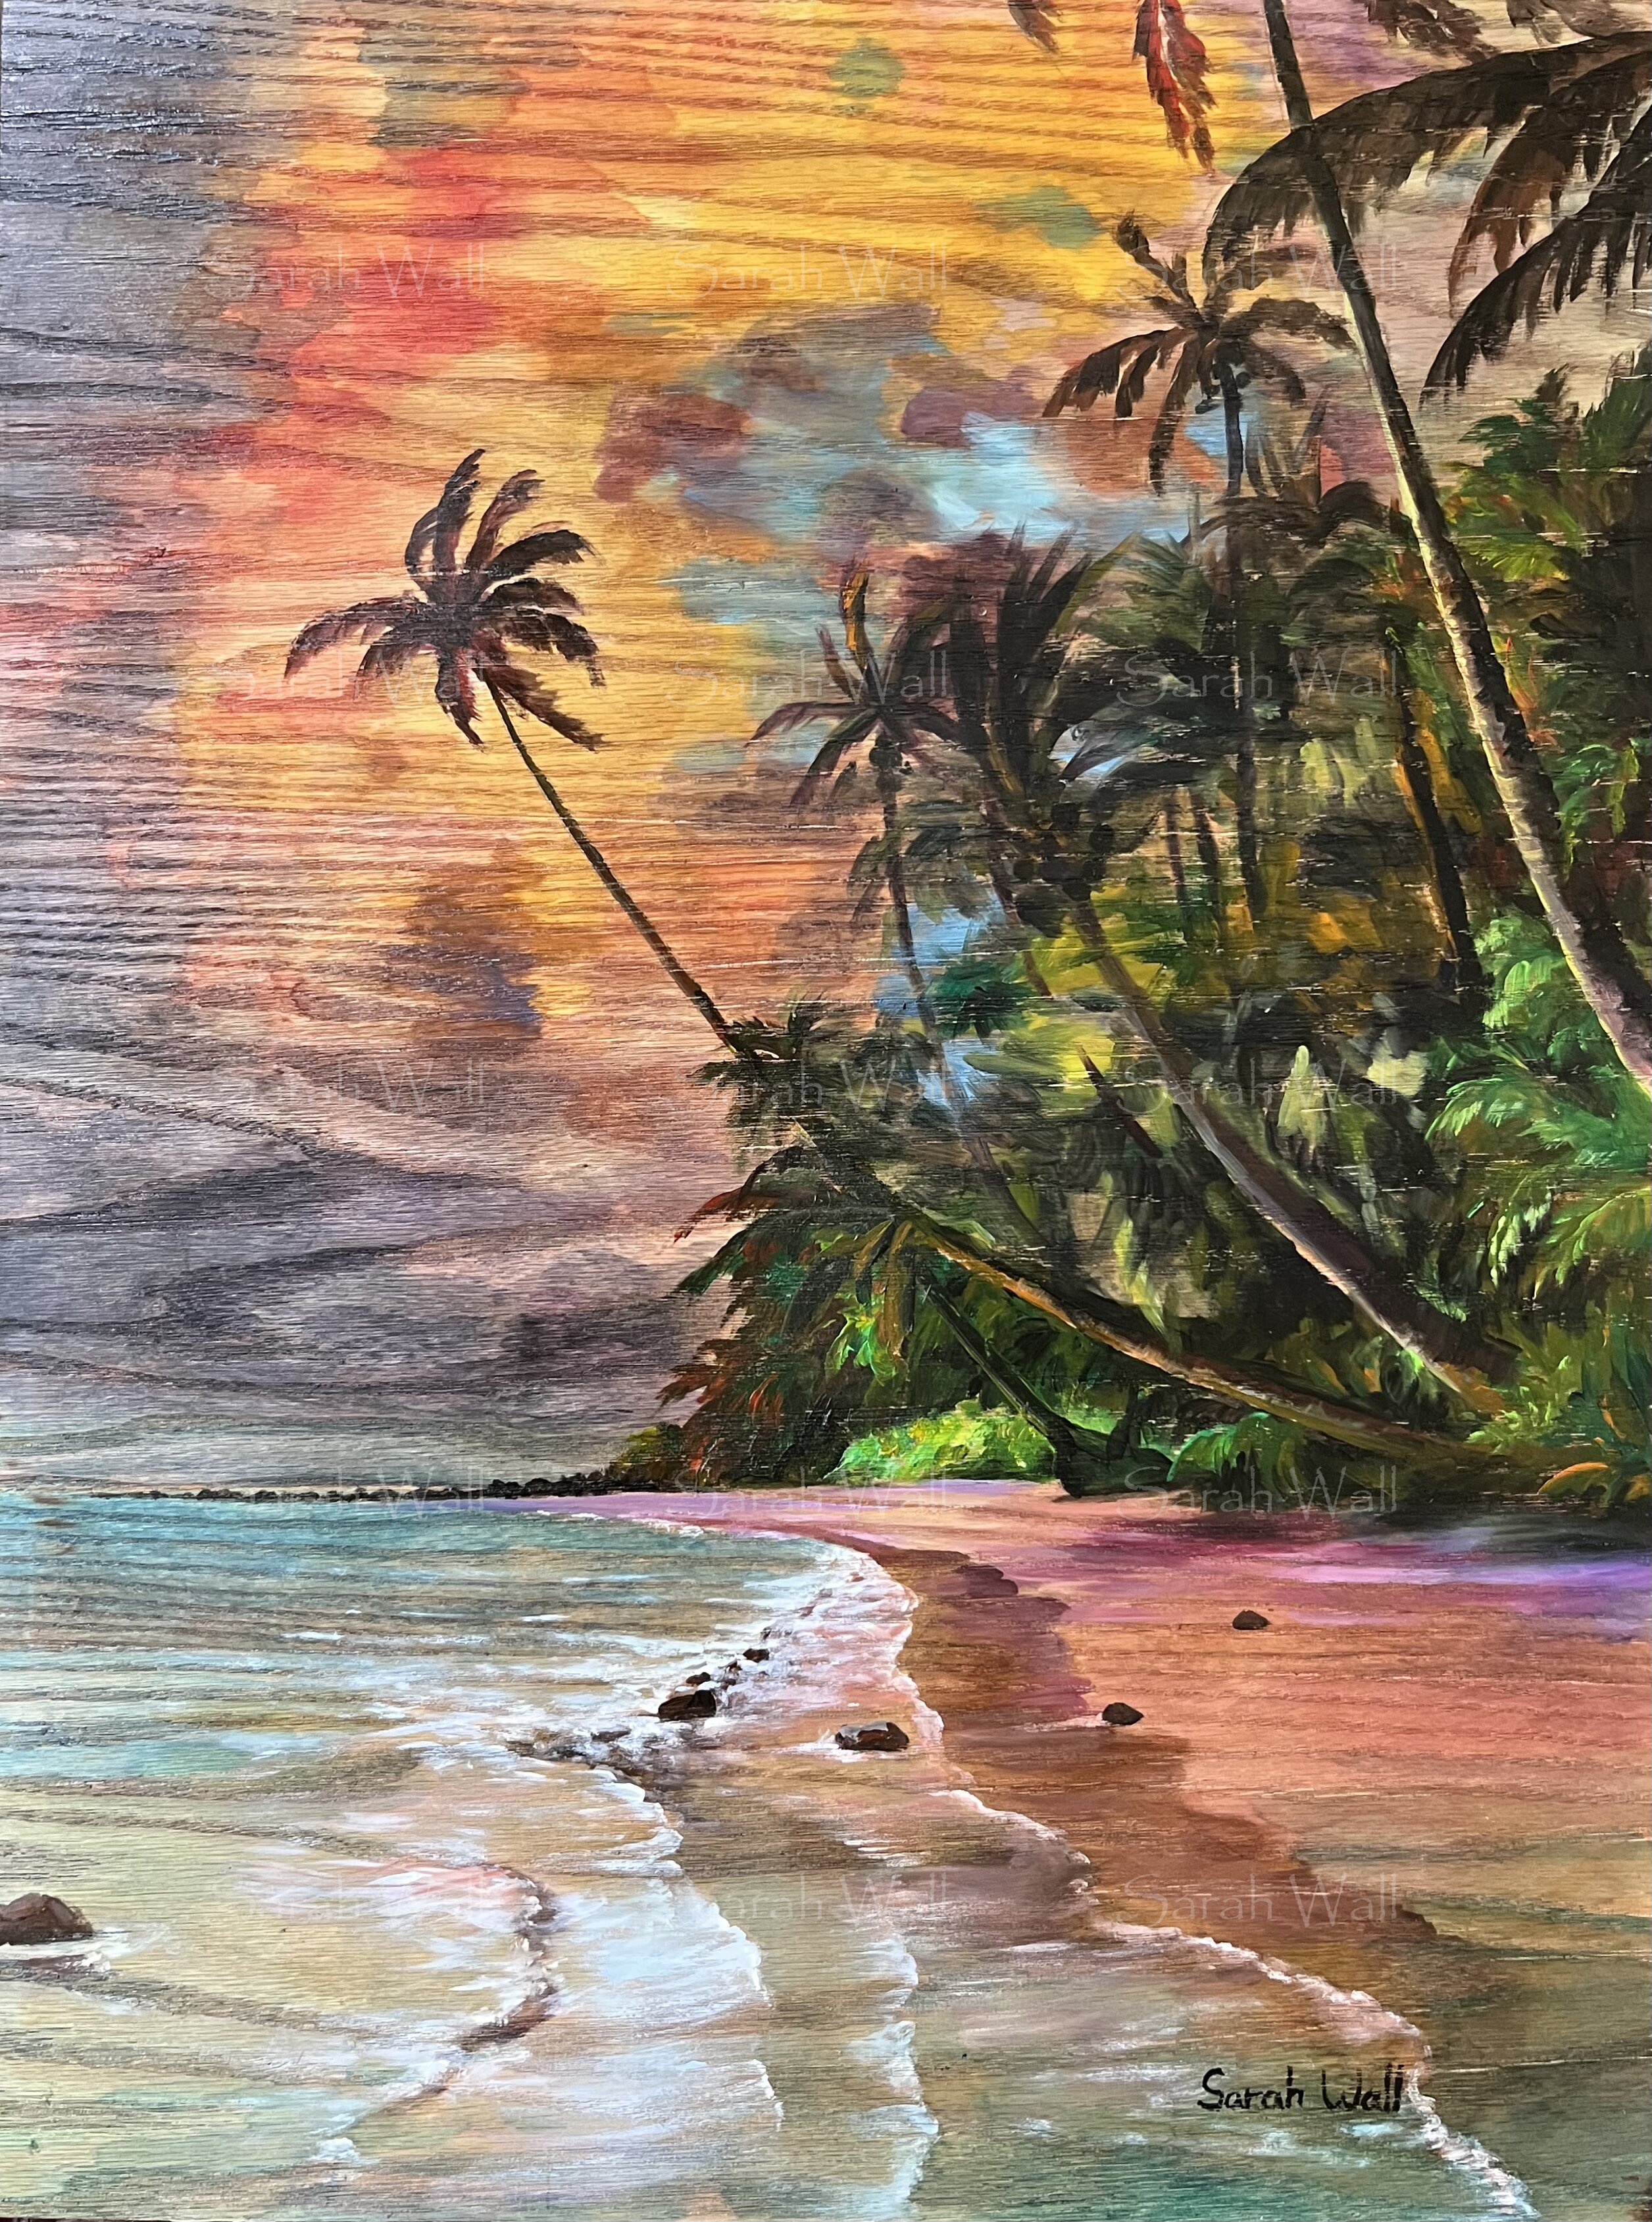 Sarah Wall: 'out of the jungle', 2022 Oil Painting, Beach. Beautiful tropical beach palm trees seascape sunrise ...